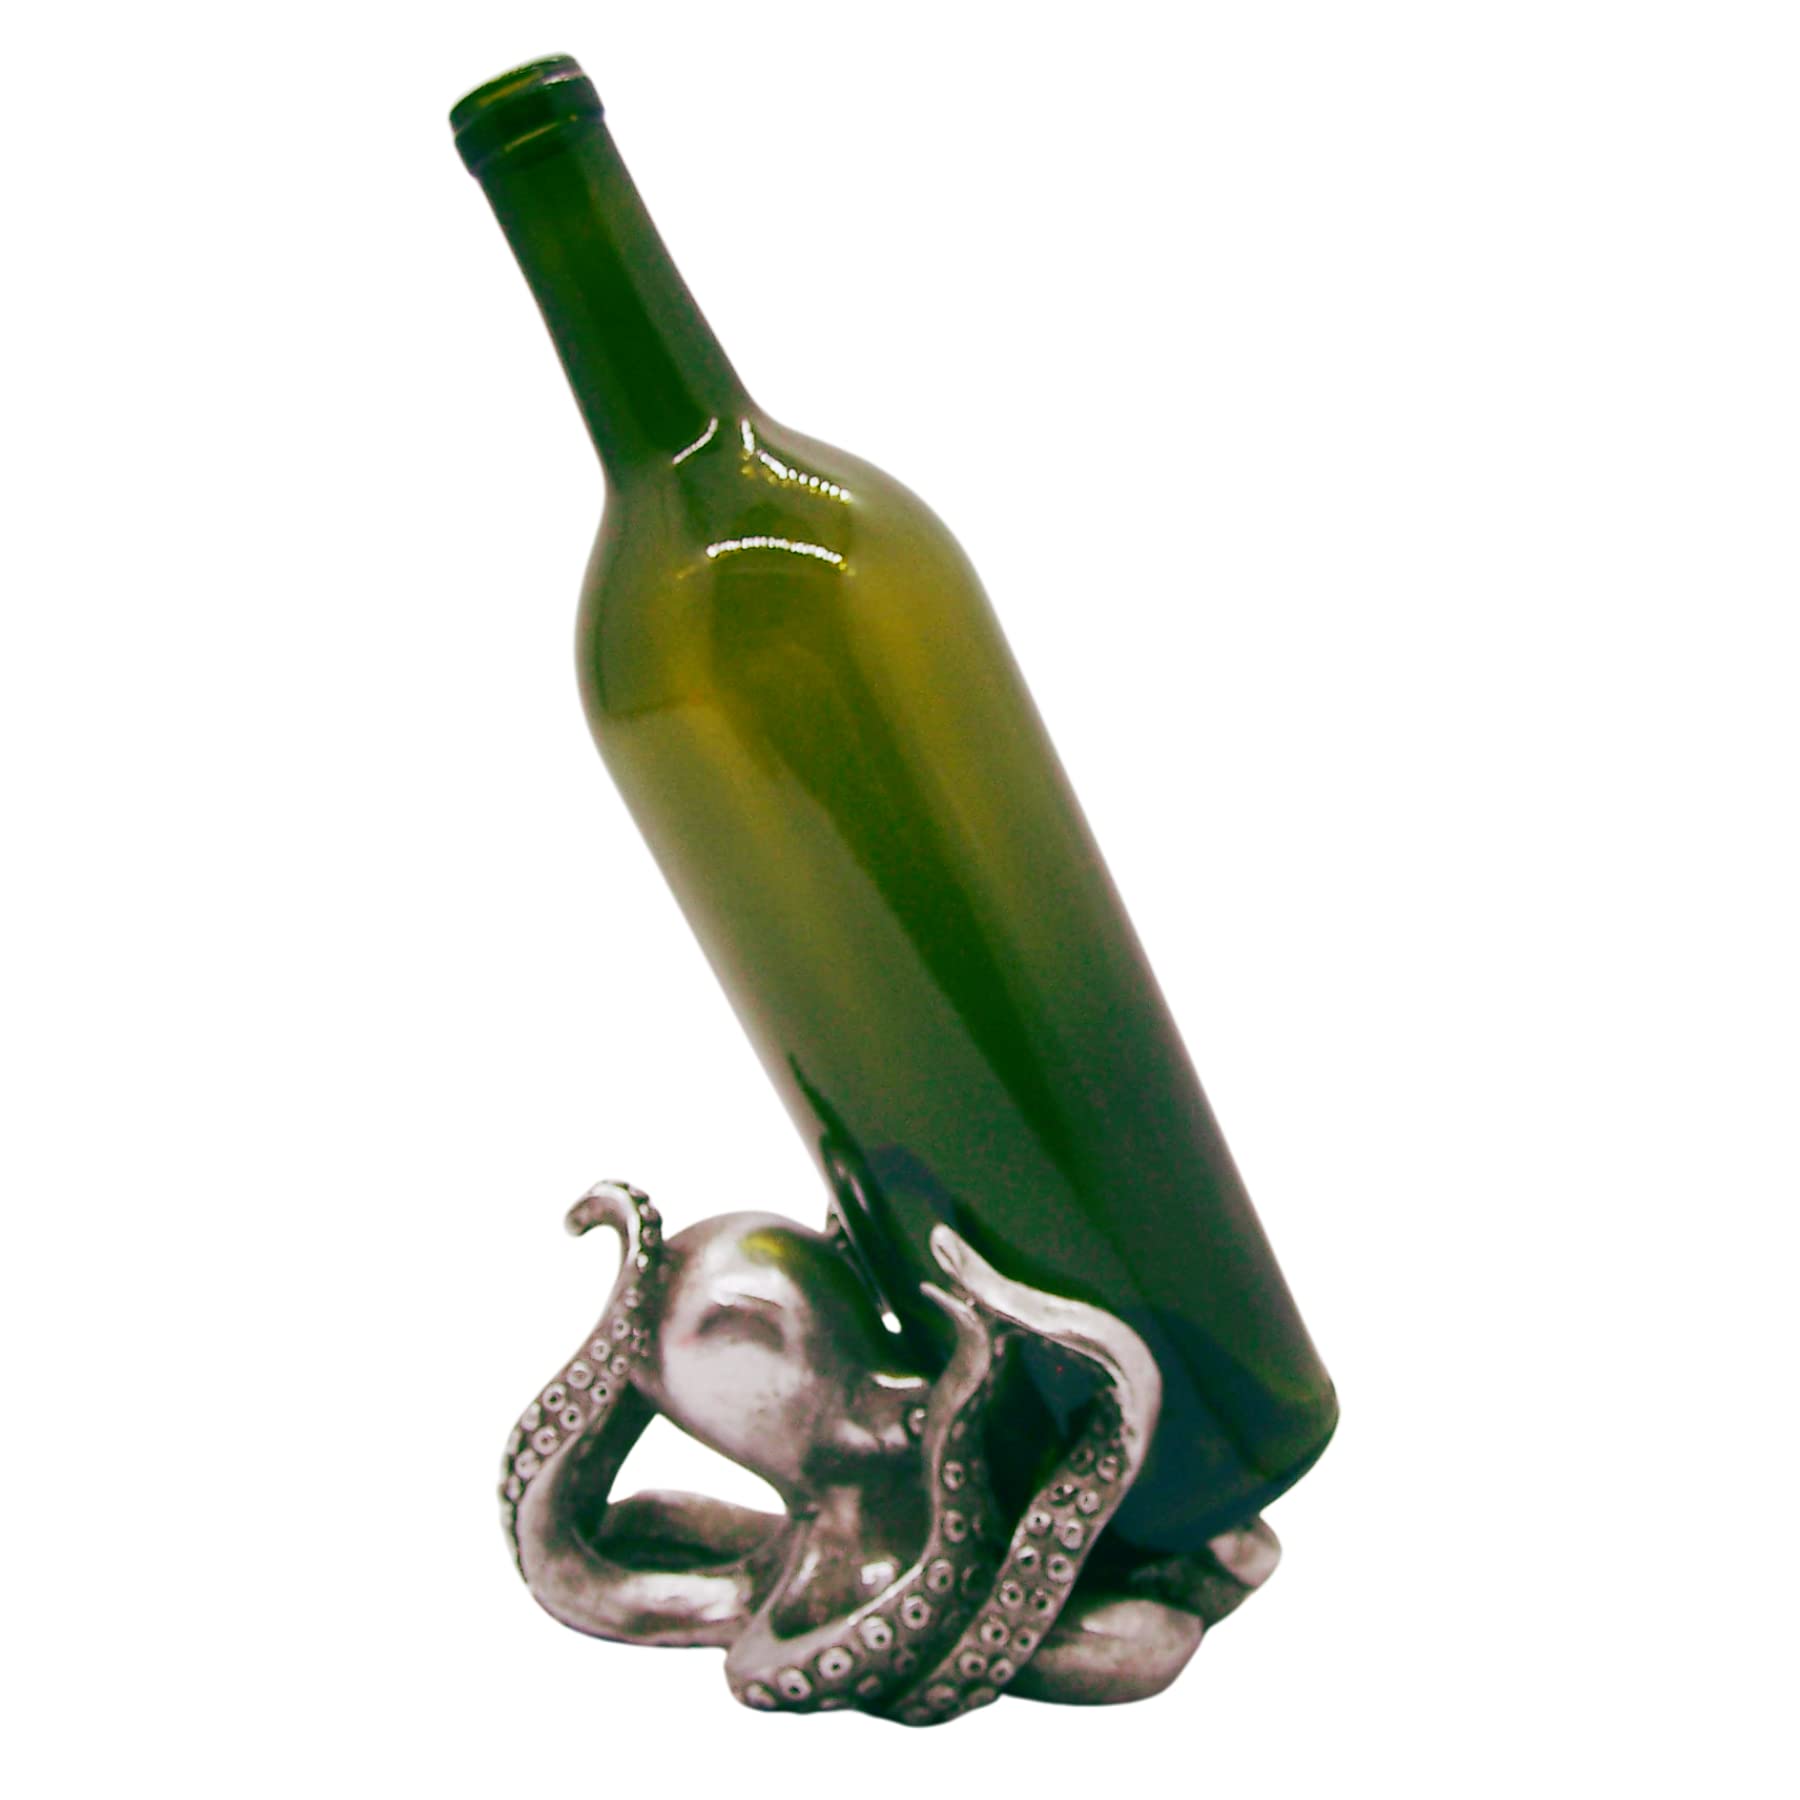 Octopus Wine Bottle Holder, Nautical Décor, Freestanding Tabletop Decoration, 4 Inches